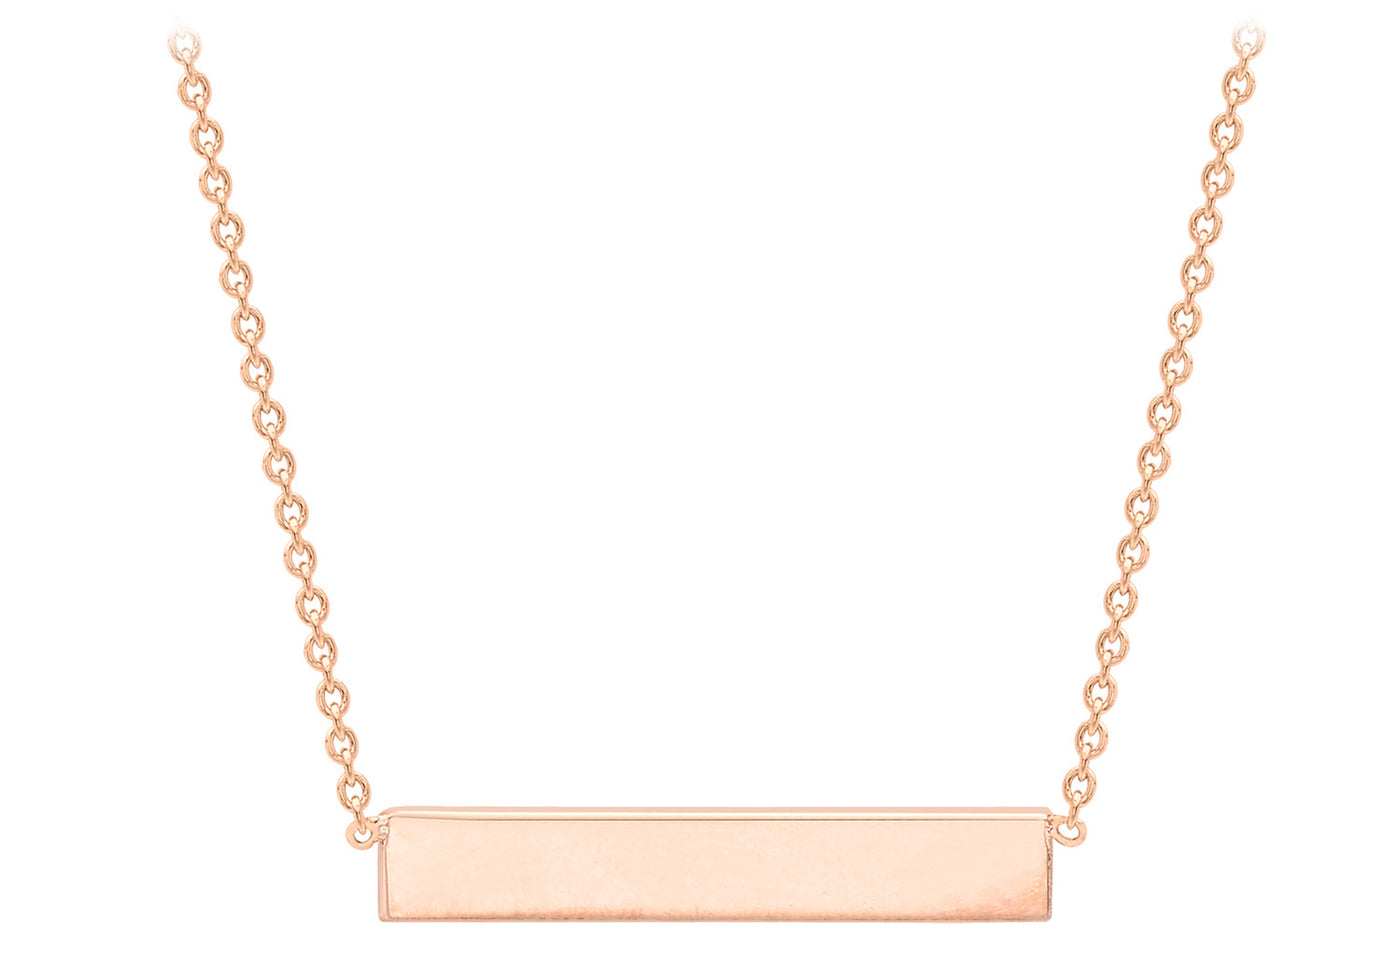 9ct Rose Gold Bar Necklace.